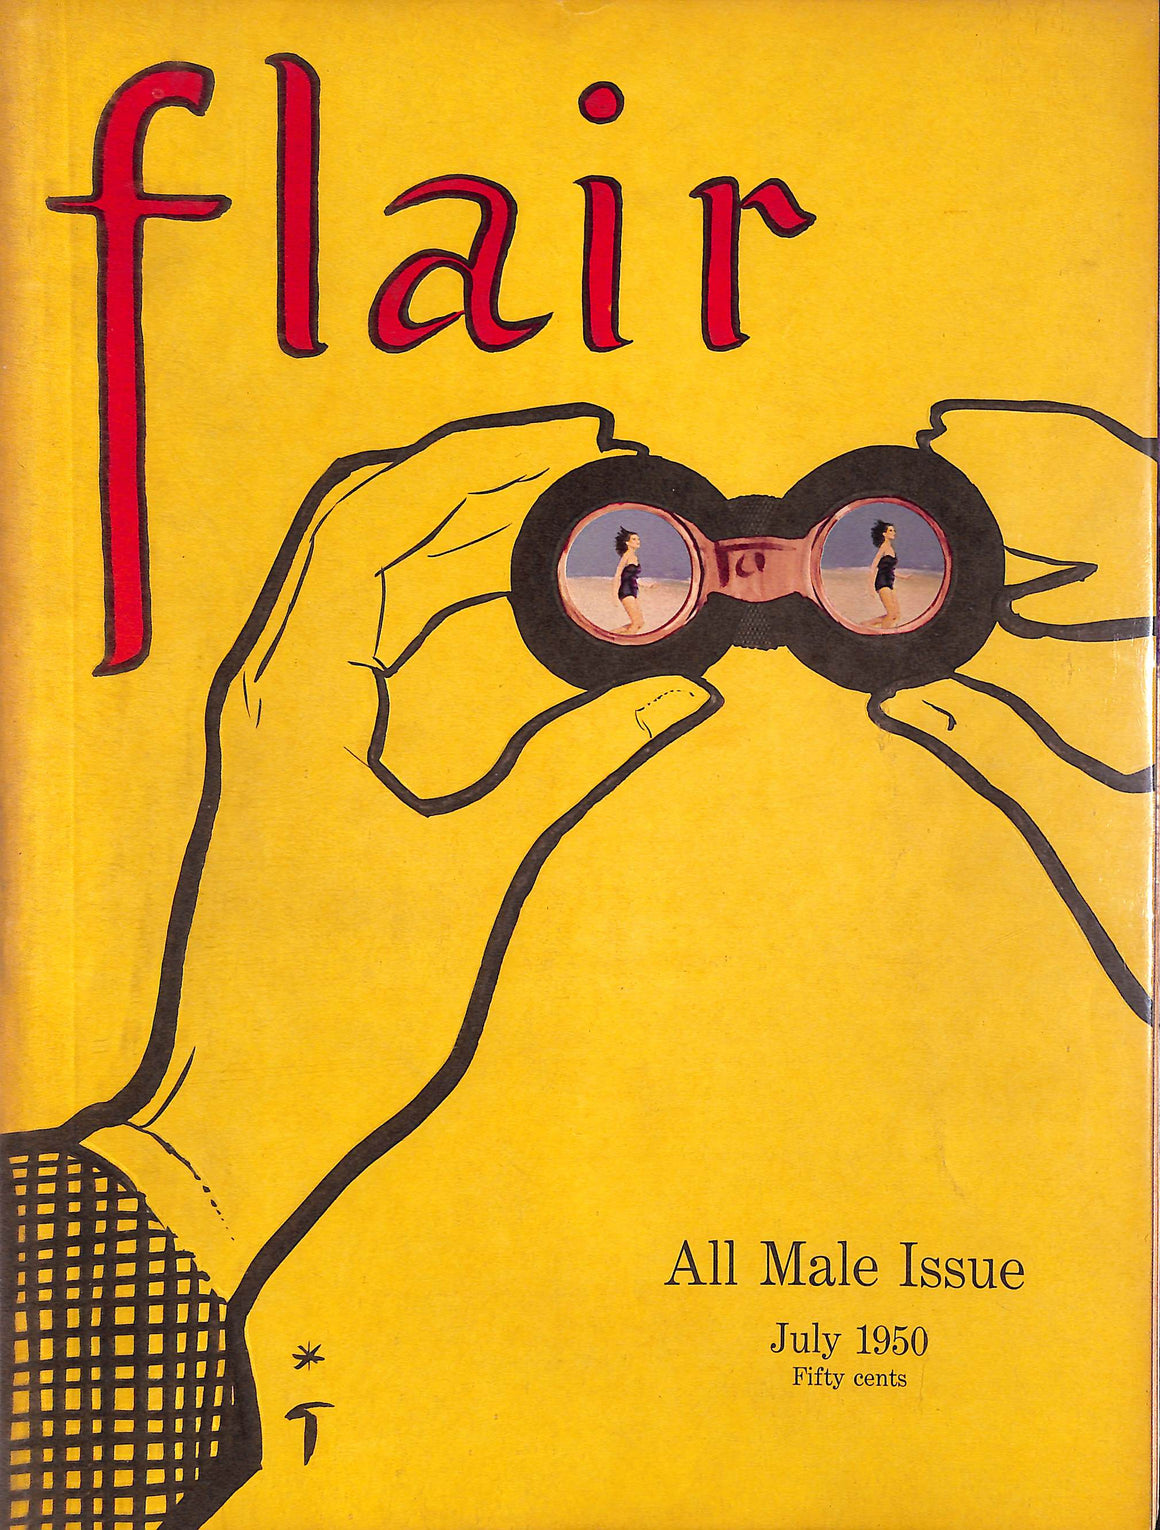 "Flair No 6 All Male Issue" July 1950 (SOLD)